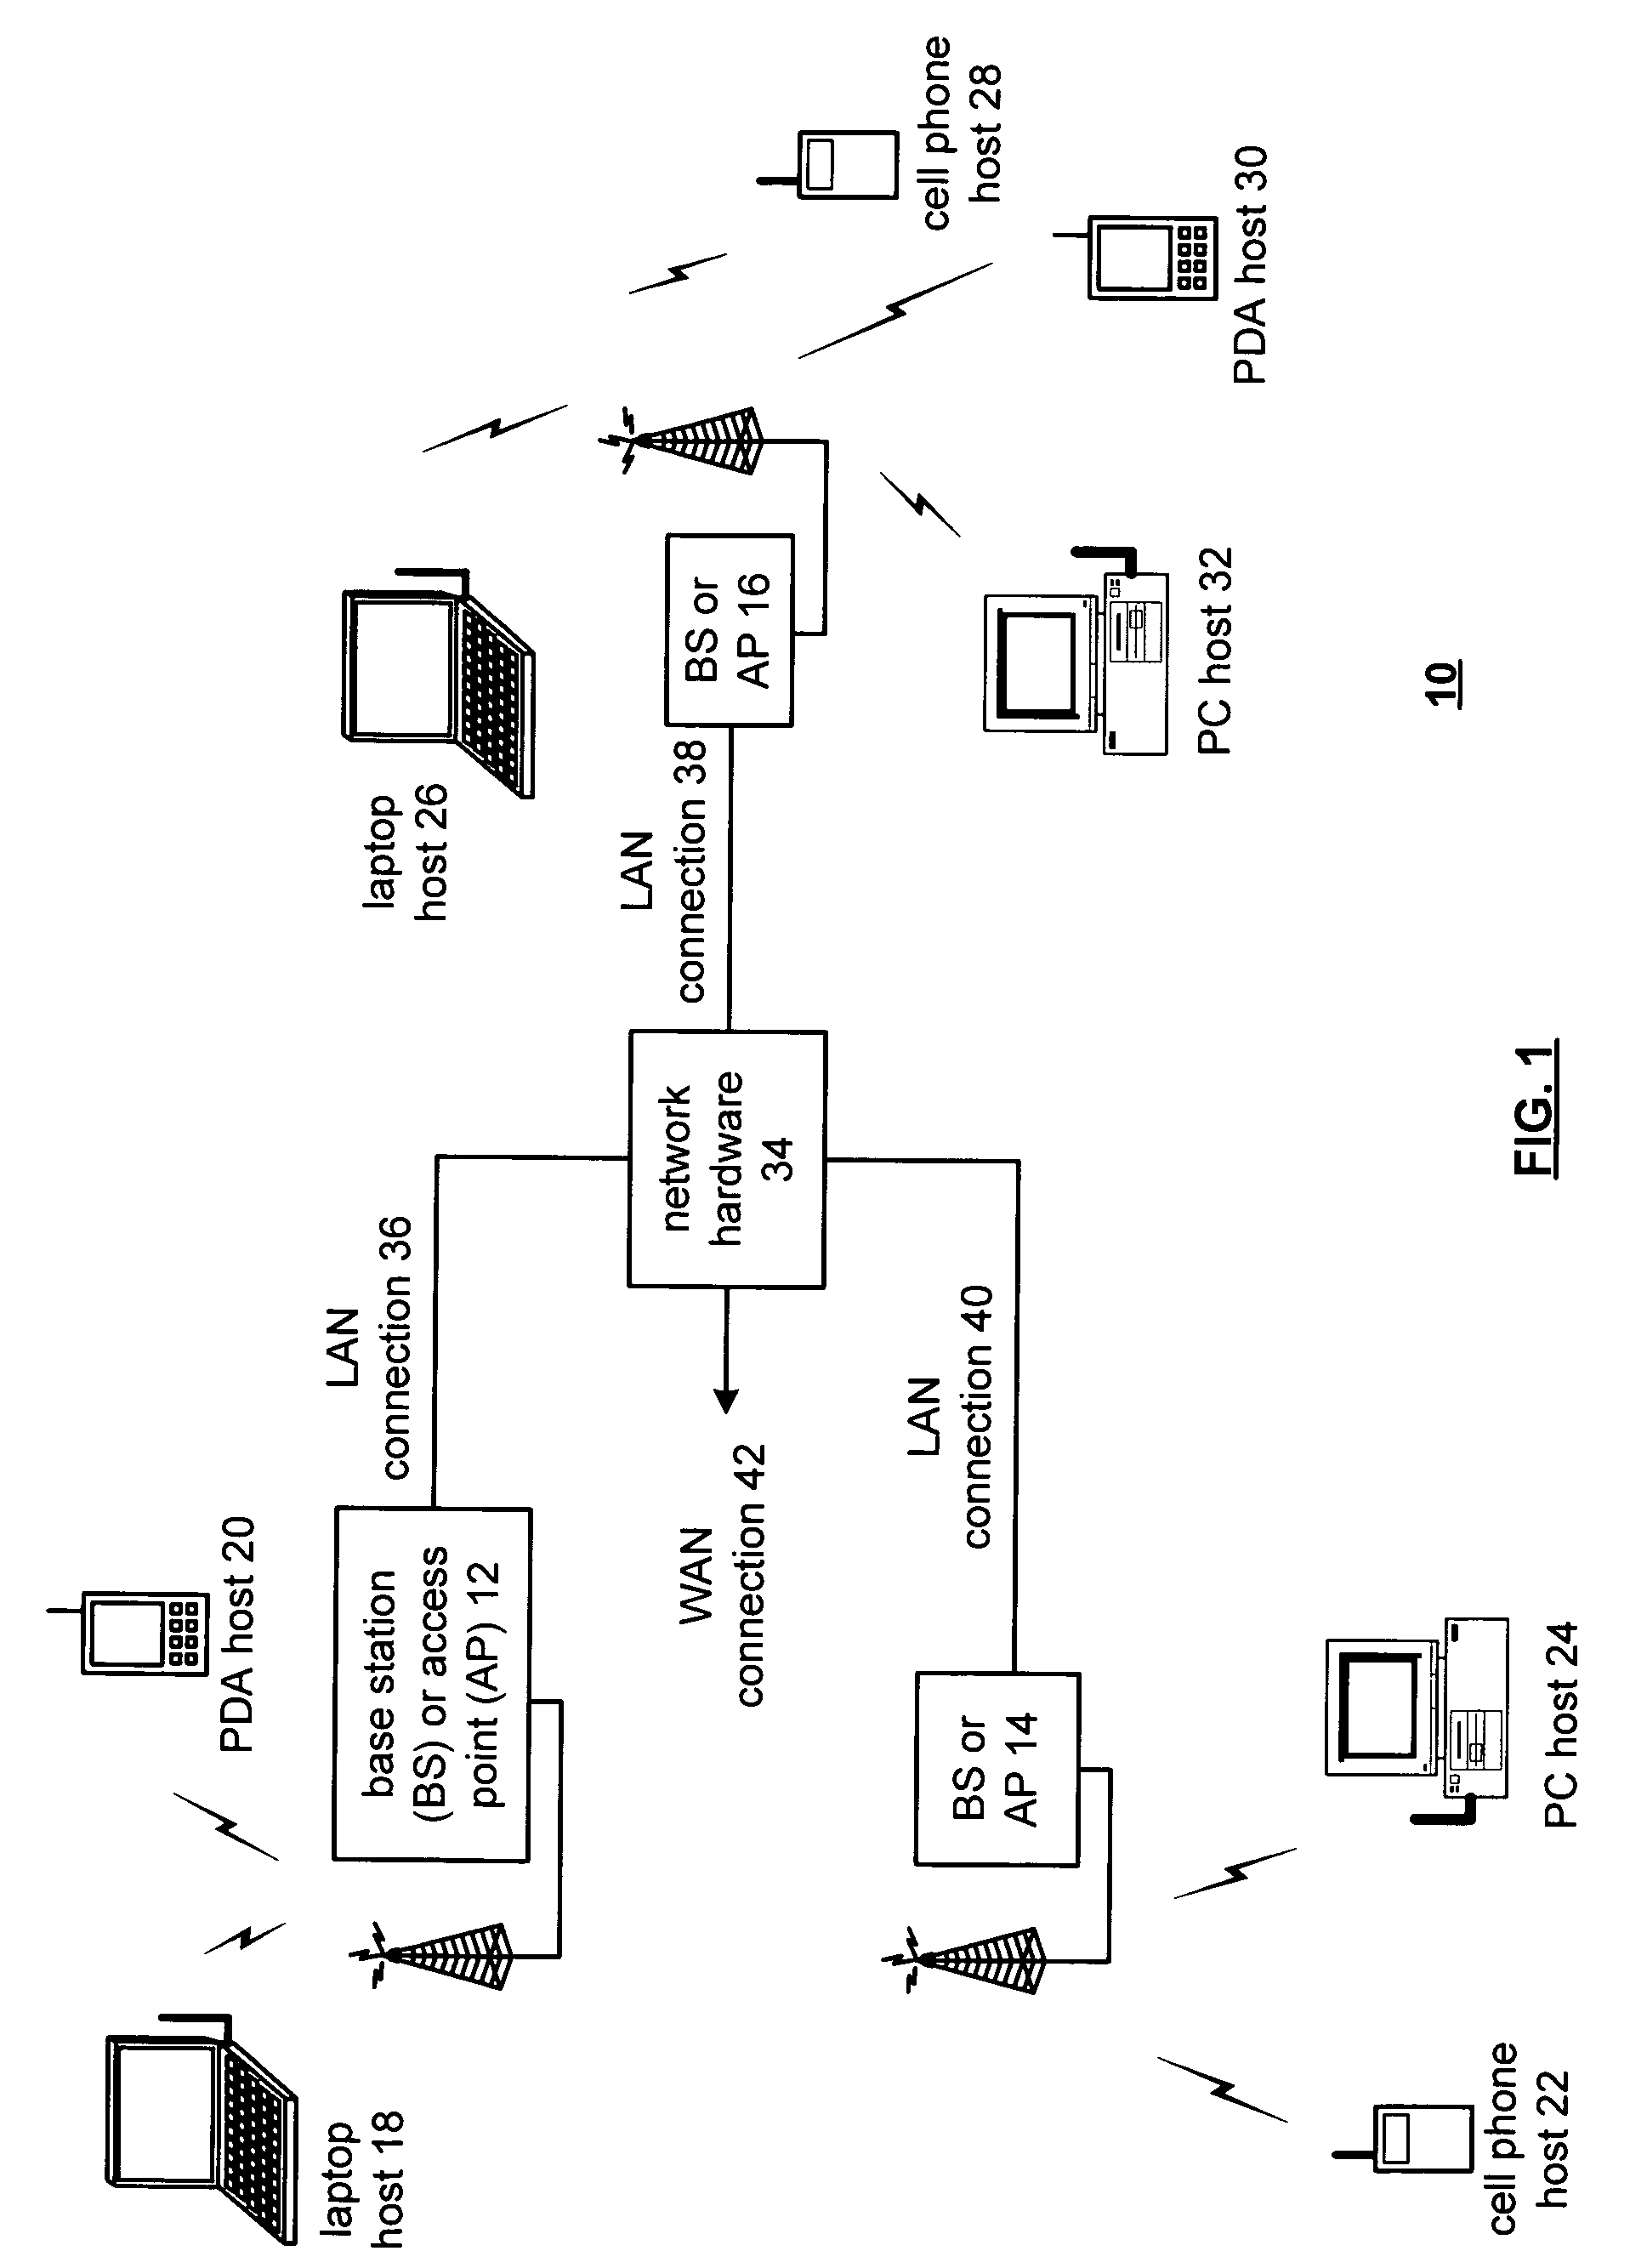 Control of transmit power of a radio frequency integrated circuit